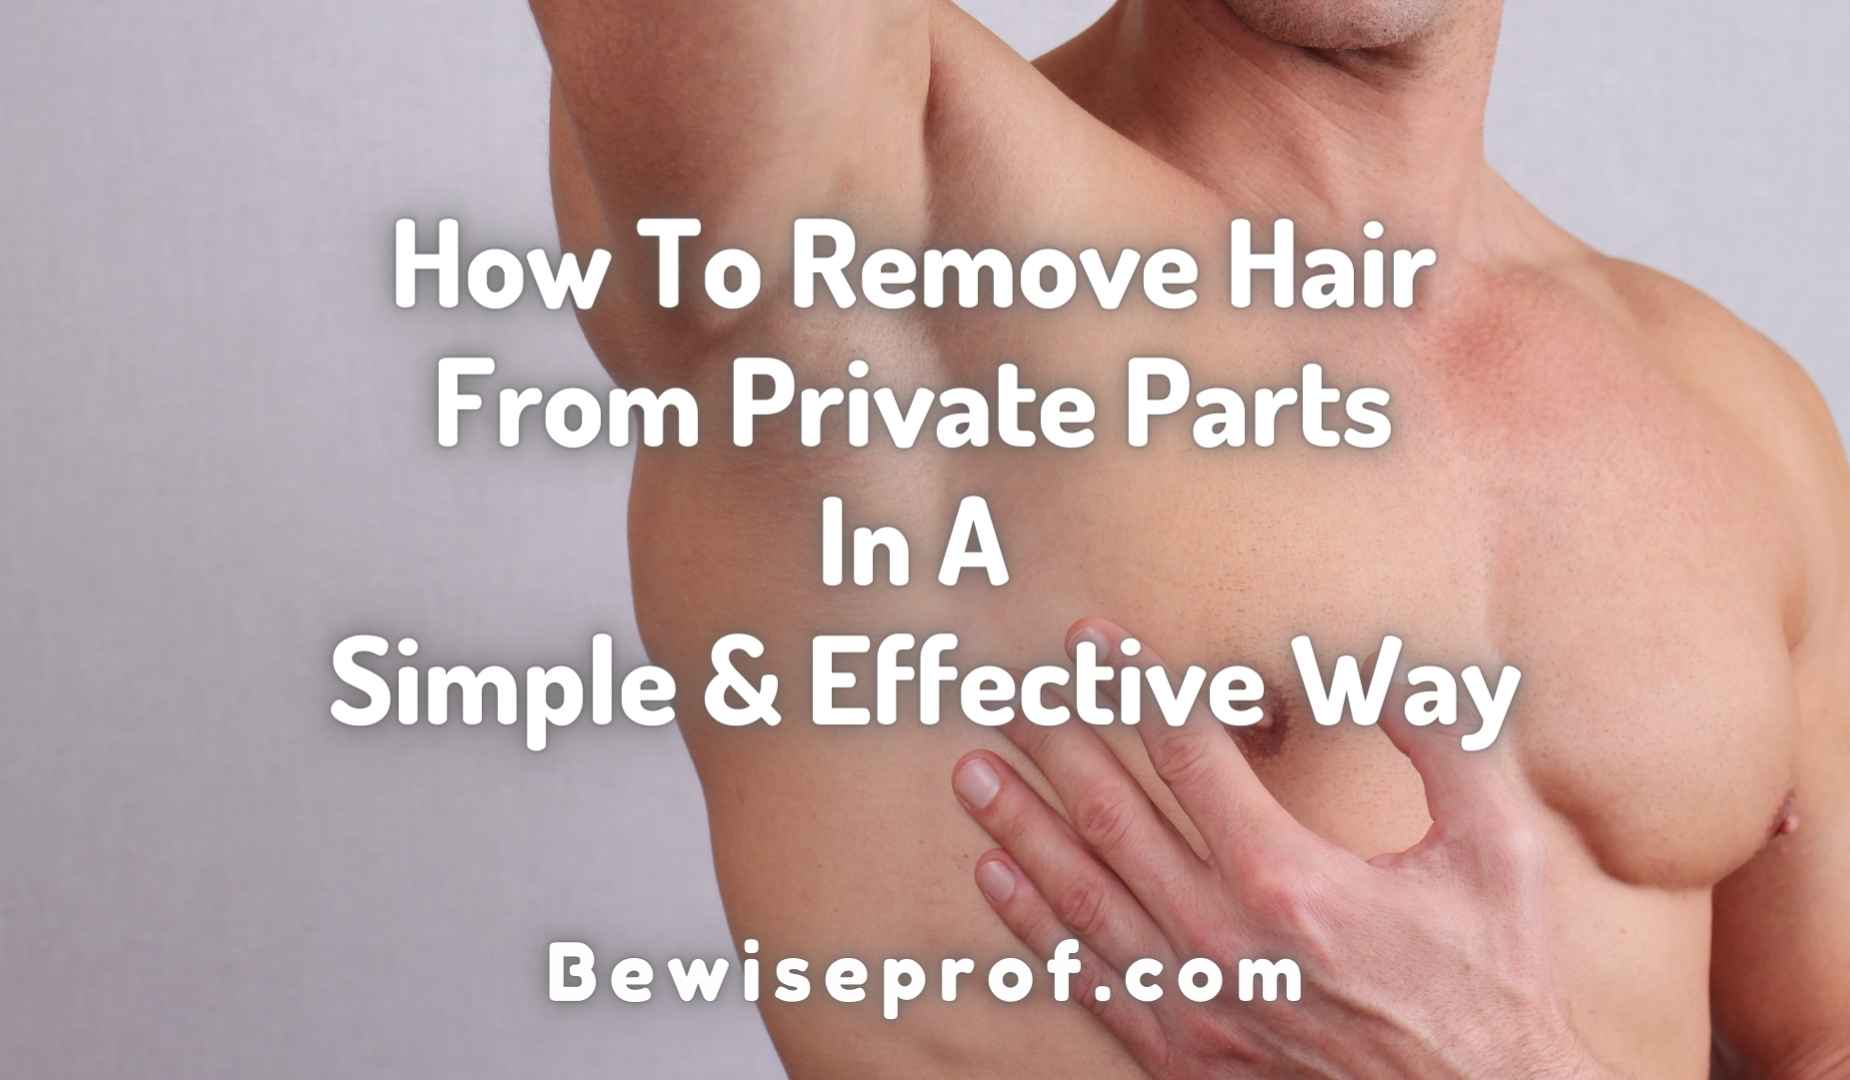 How To Remove Hair From Private Parts In A Simple And Effective Way